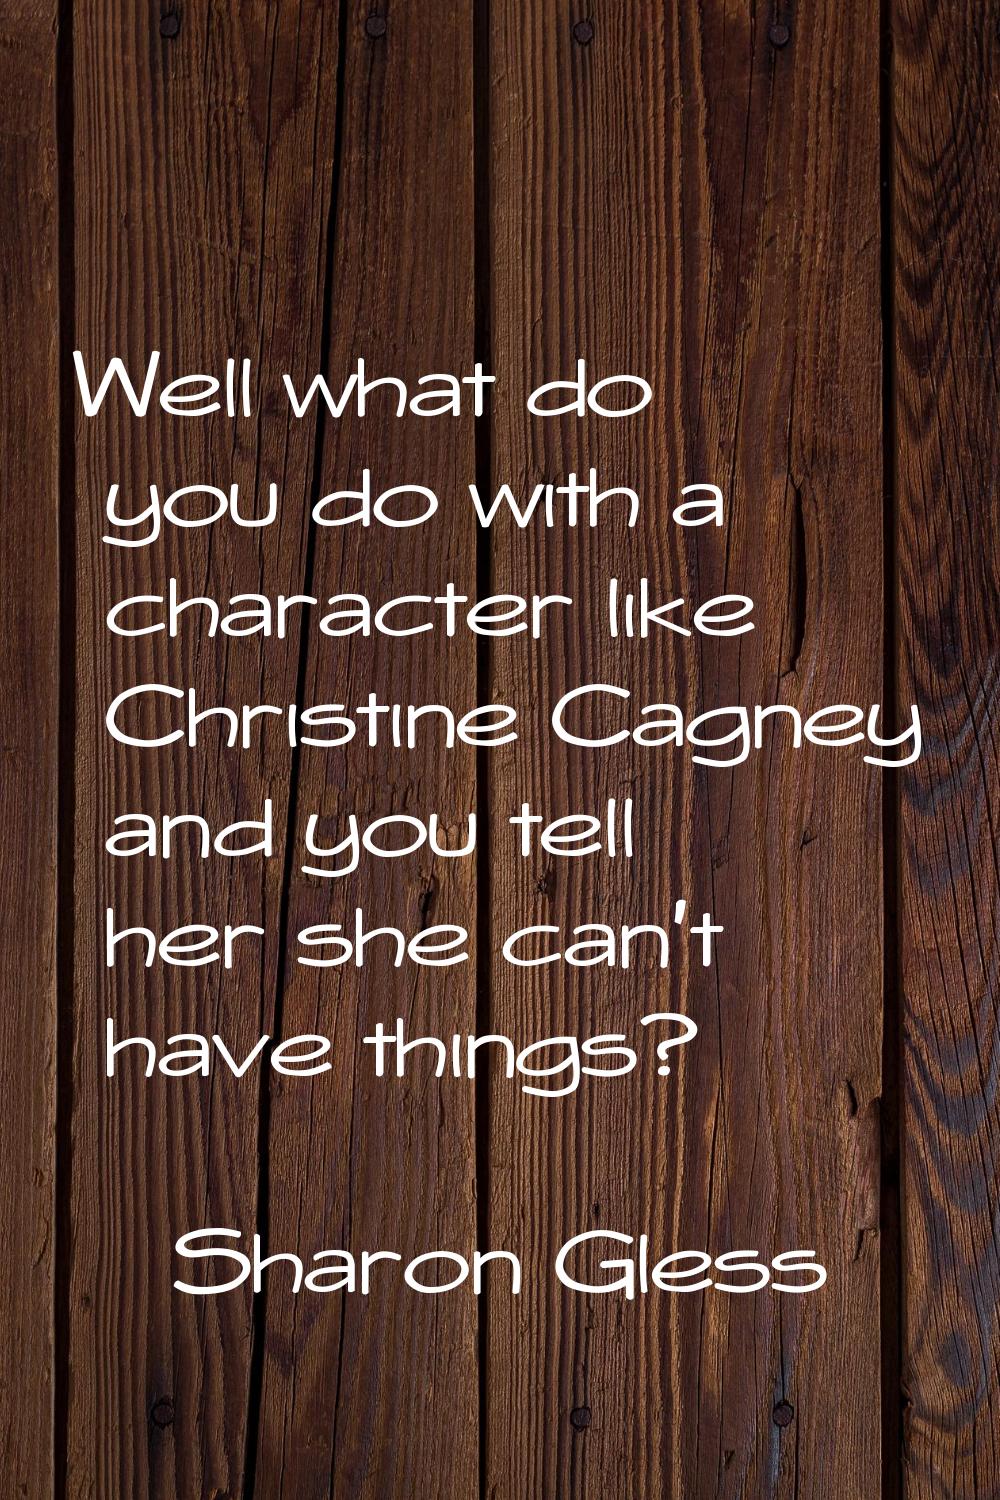 Well what do you do with a character like Christine Cagney and you tell her she can't have things?